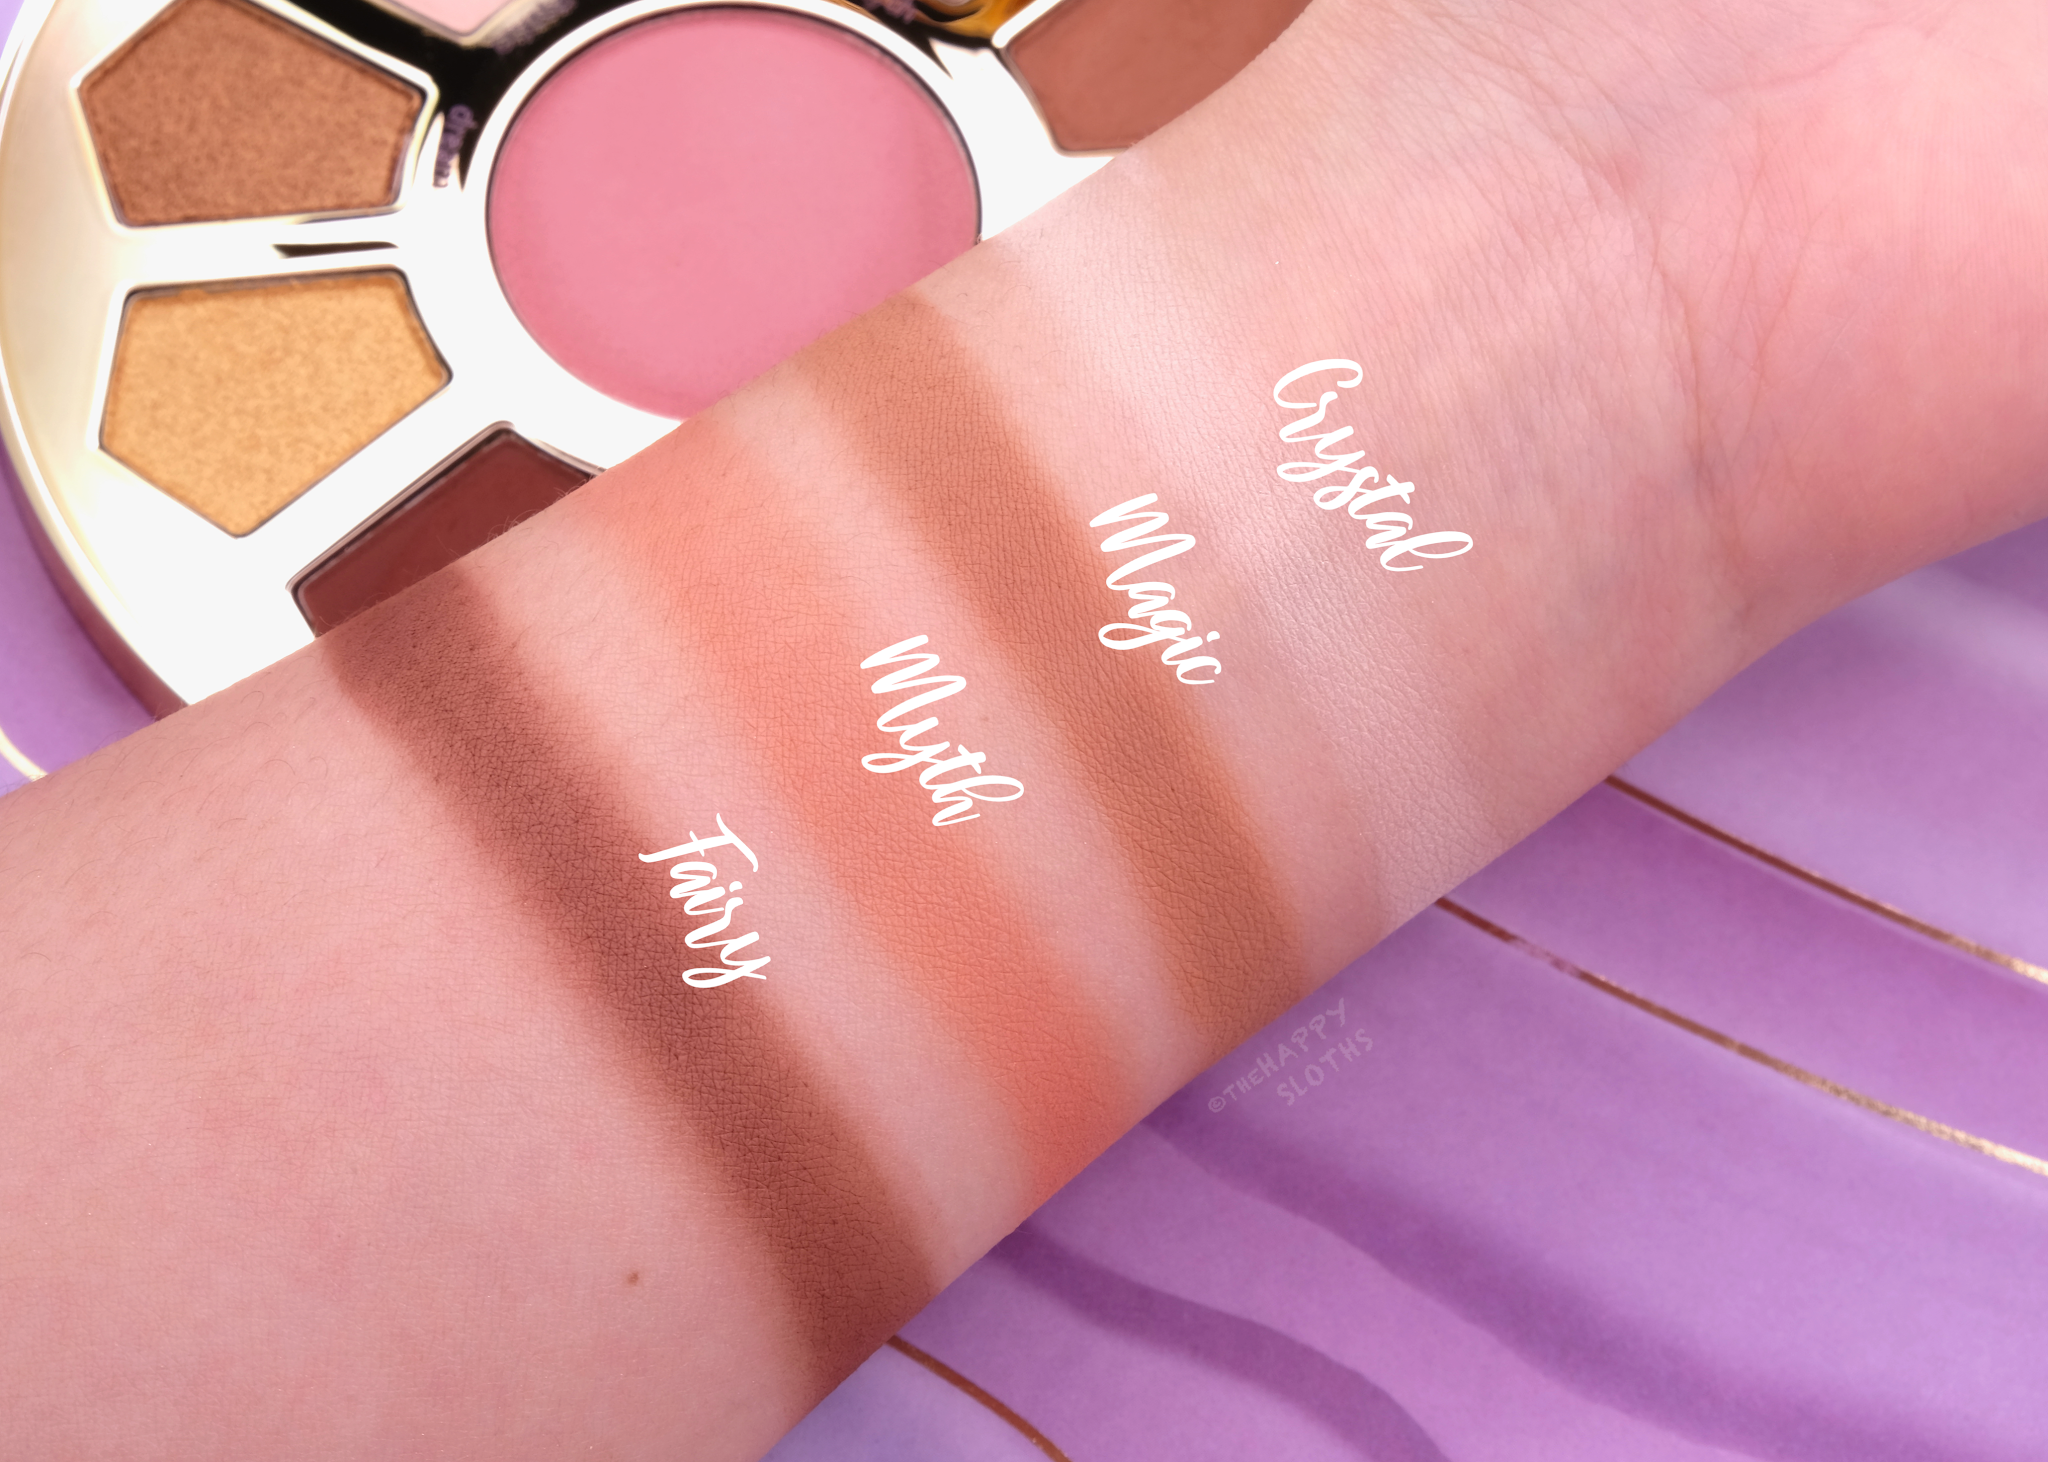 Tarte | Sugar Rush™ Dream On Eye & Cheek Palette: Review and Swatches